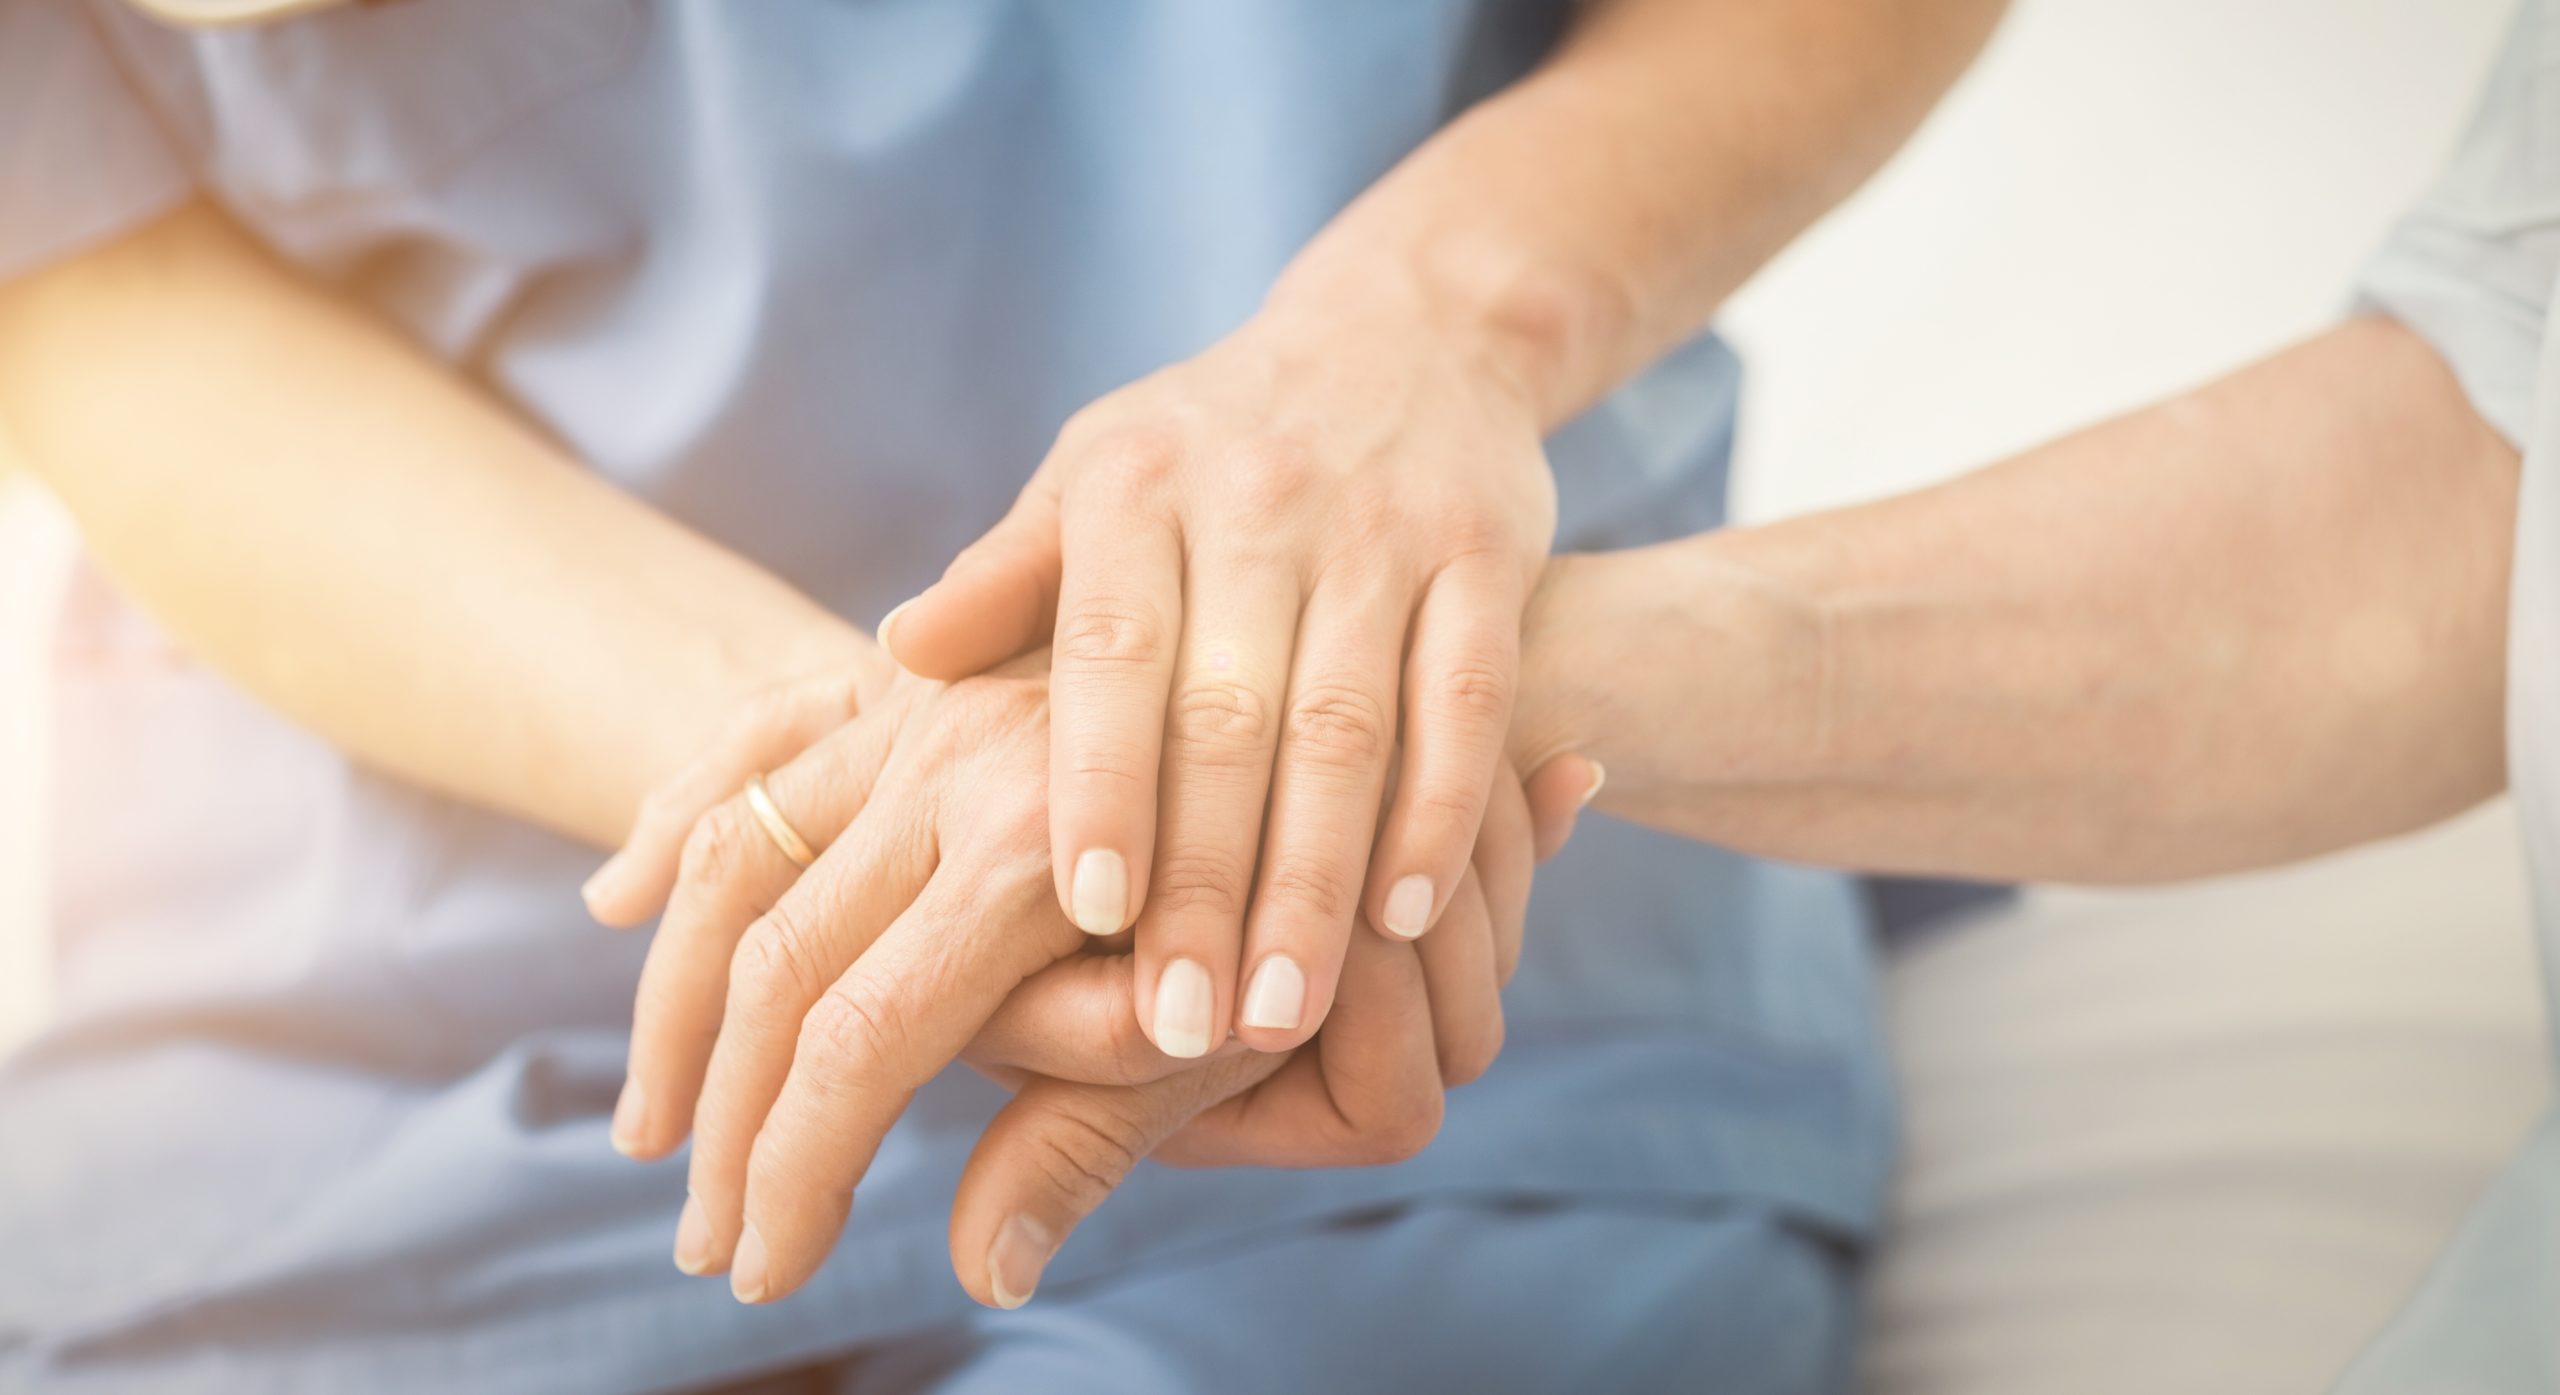 Close-up of a nurse practitioner holding an elderly patient's hands in a comforting and caring manner, symbolizing support and compassion in managing auto injuries.